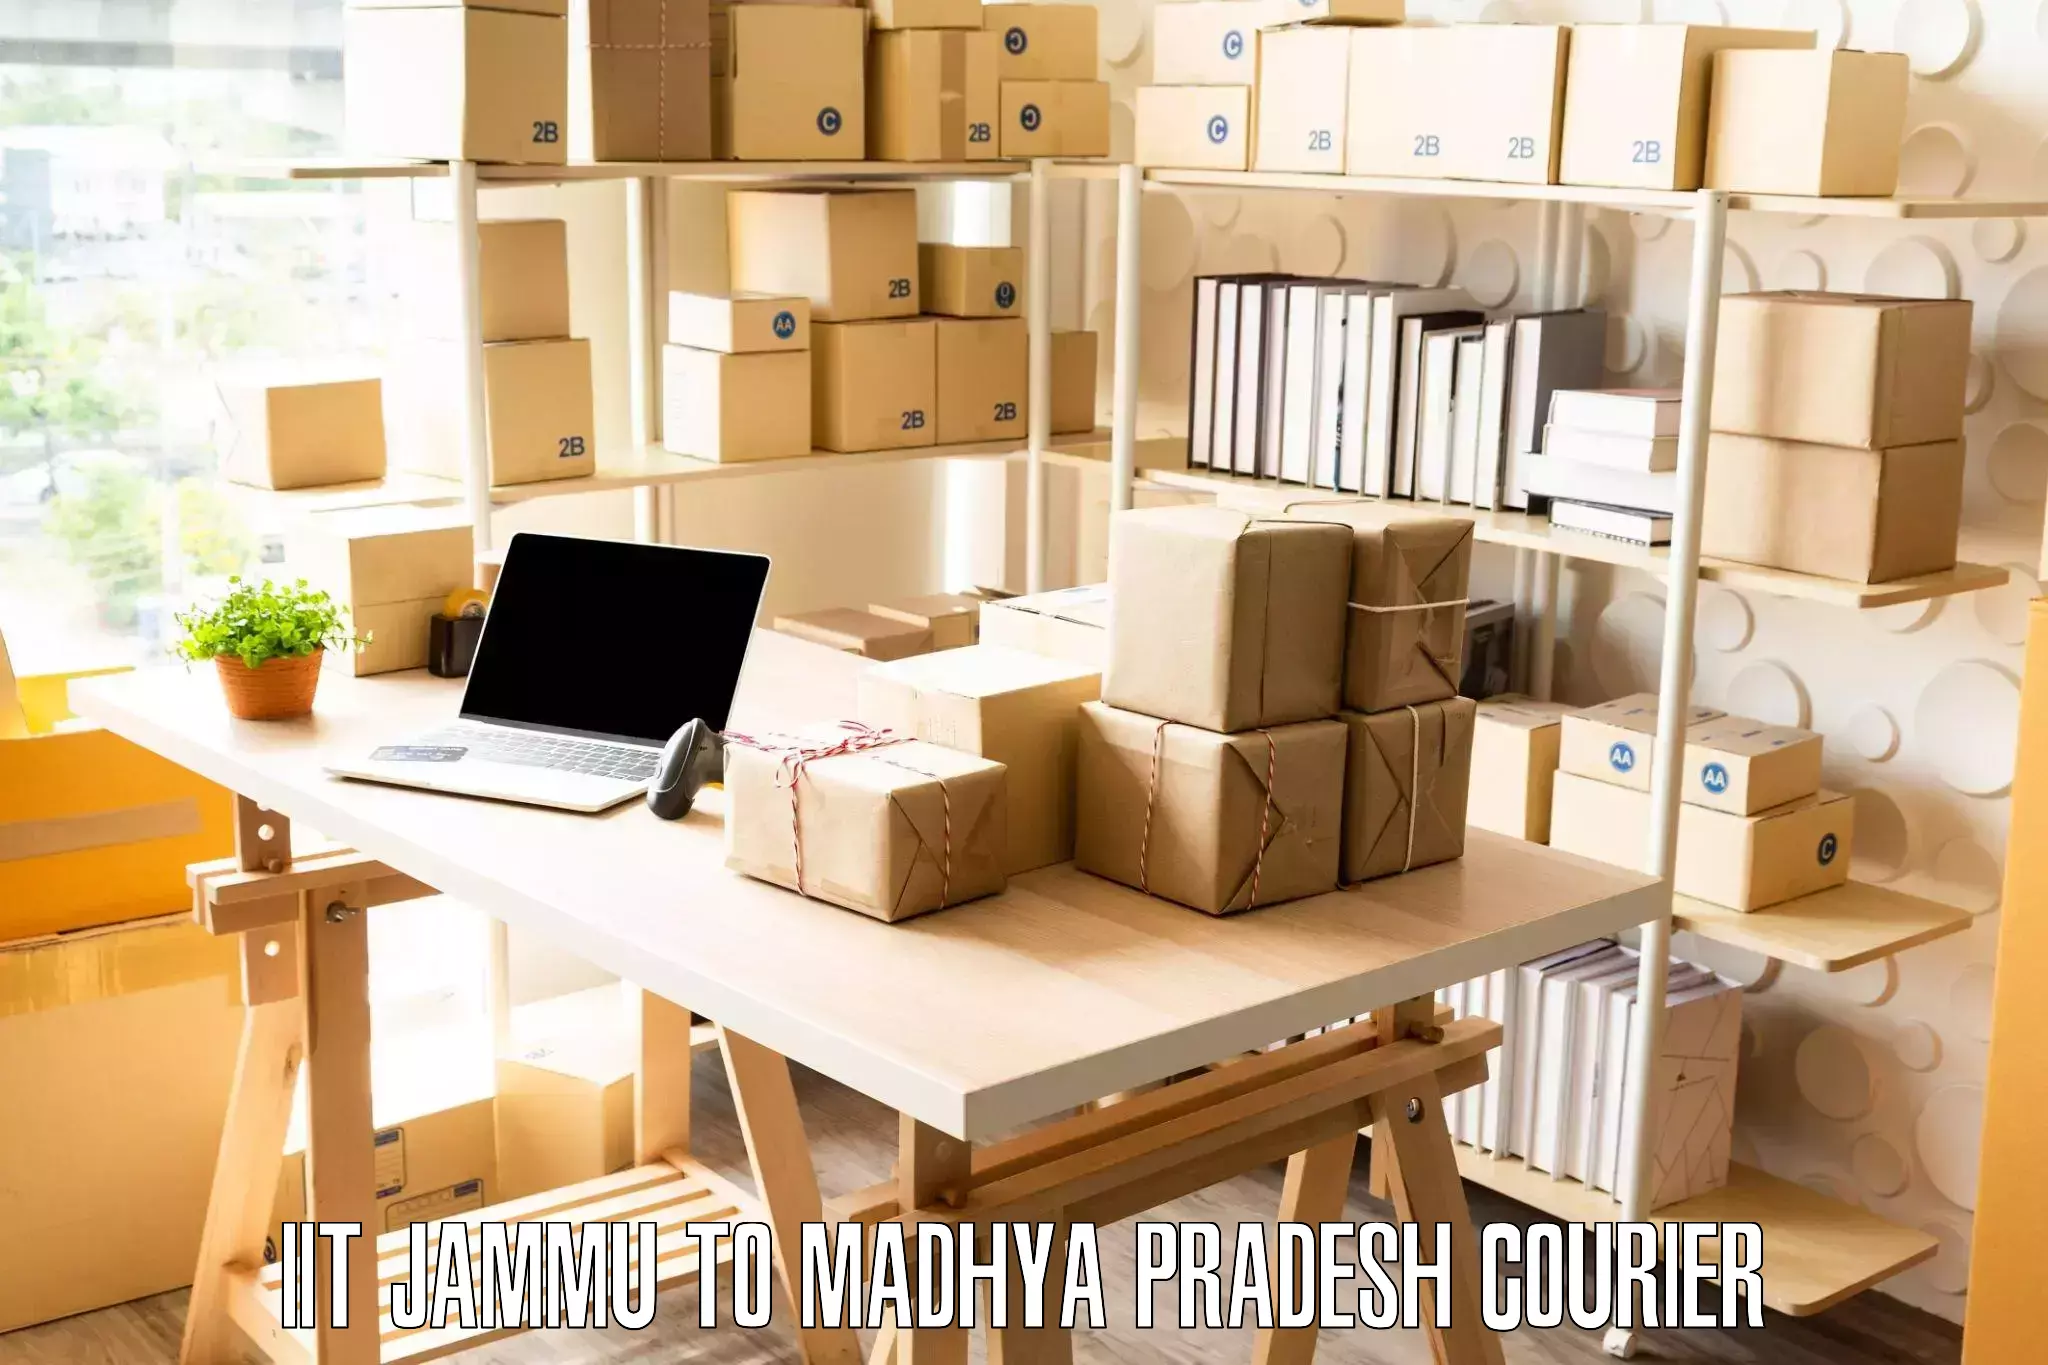 Stress-free moving in IIT Jammu to Bhopal